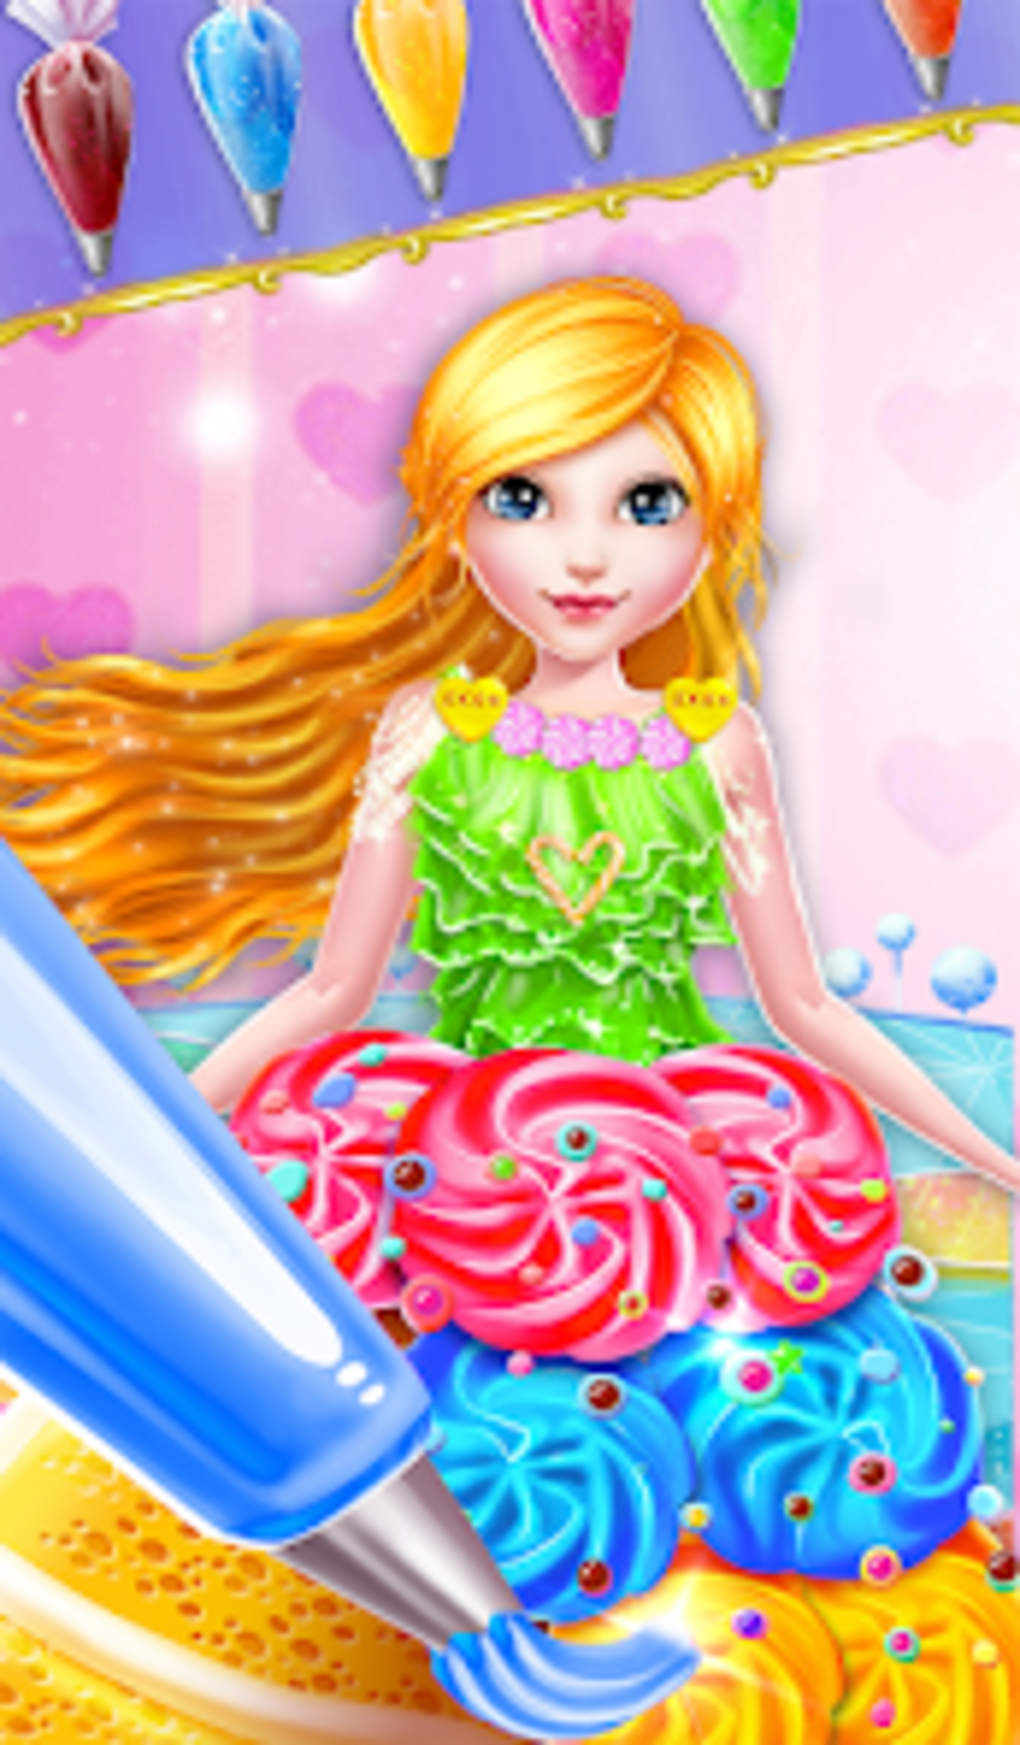 Doll House Cake Cooking - Apps on Google Play